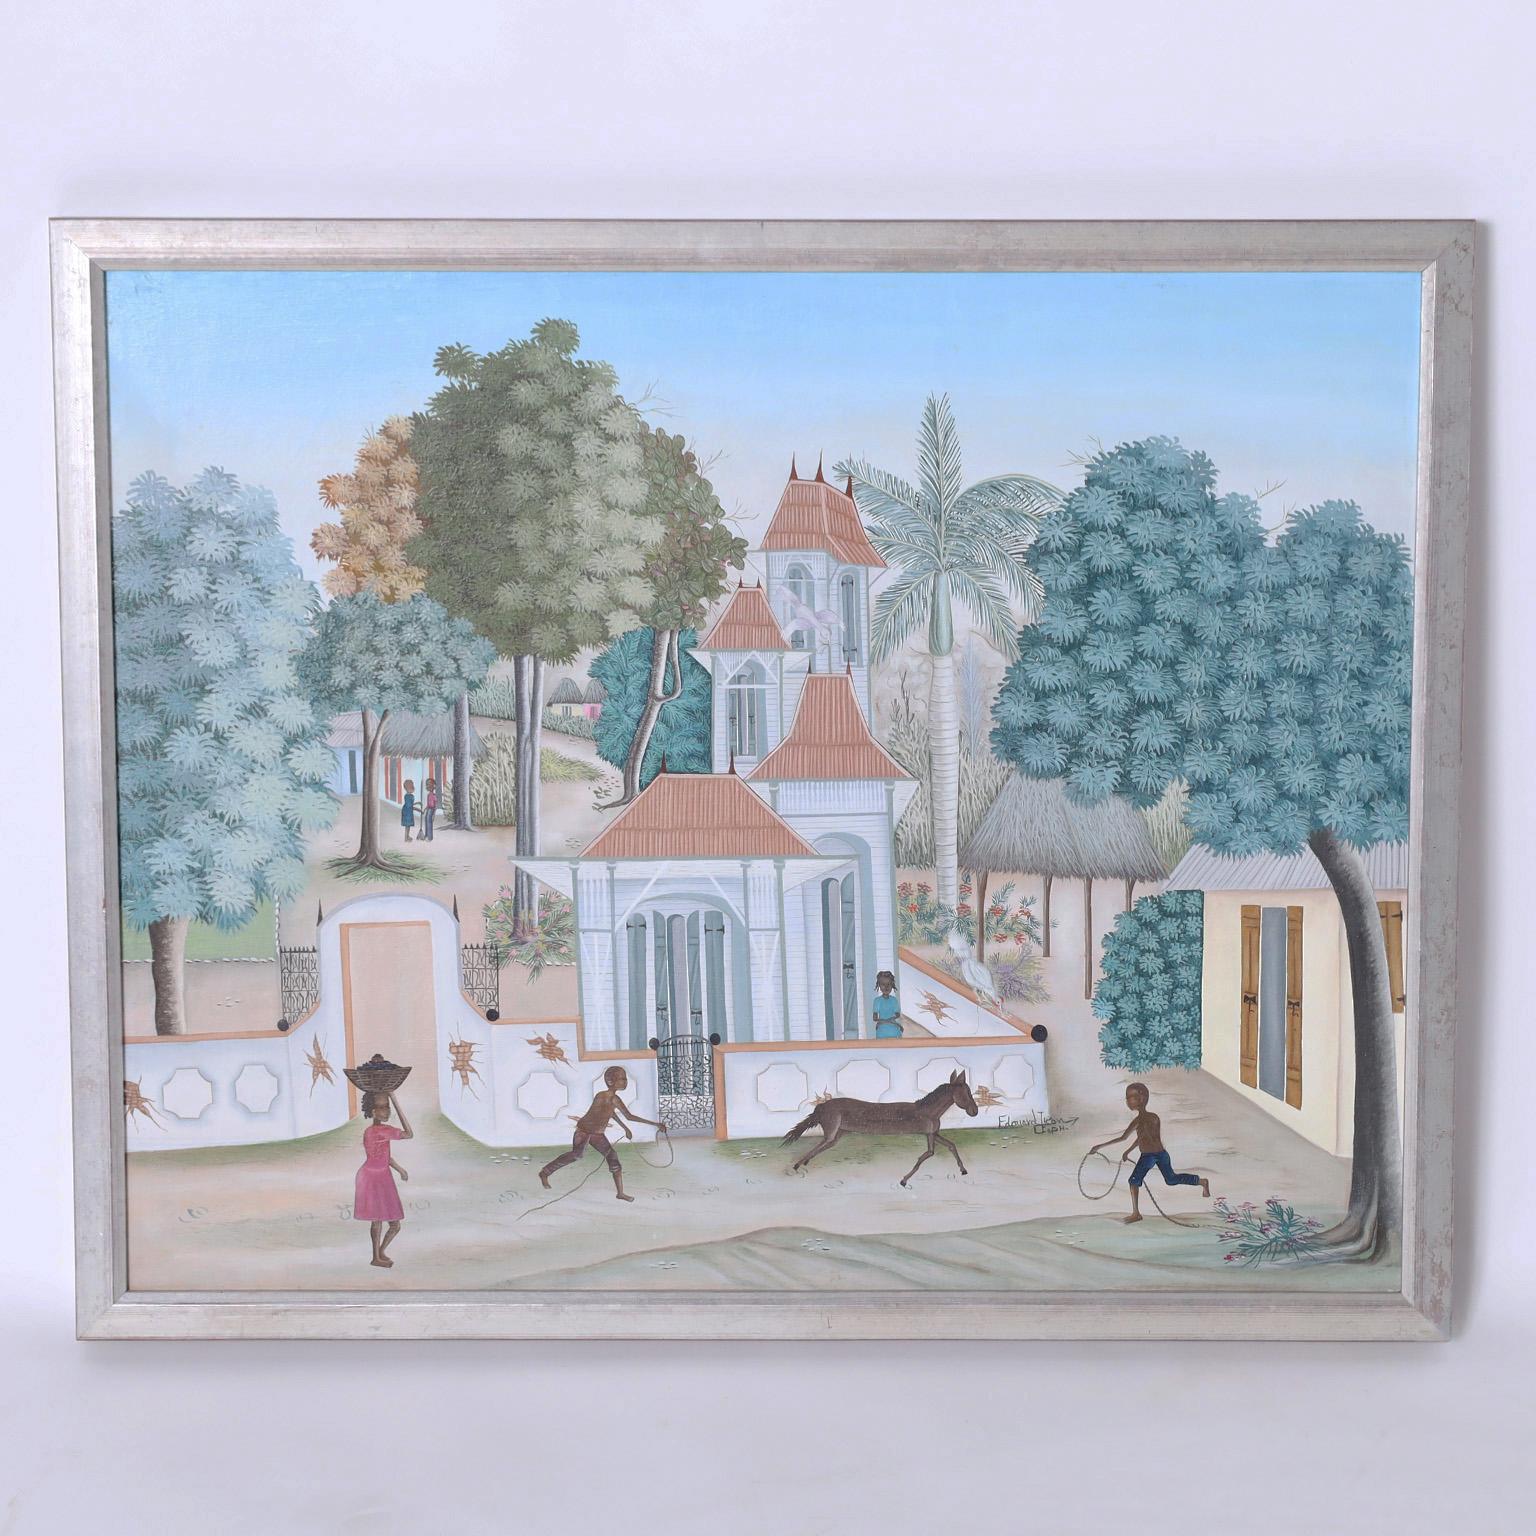 Enchanting oil painting on canvas depicting a serene Haitian village with trees, flowers, birds, and playful figures executed in a naive folk style. Signed by noted artist Edouard Tran and presented in a silver leaf wood frame.